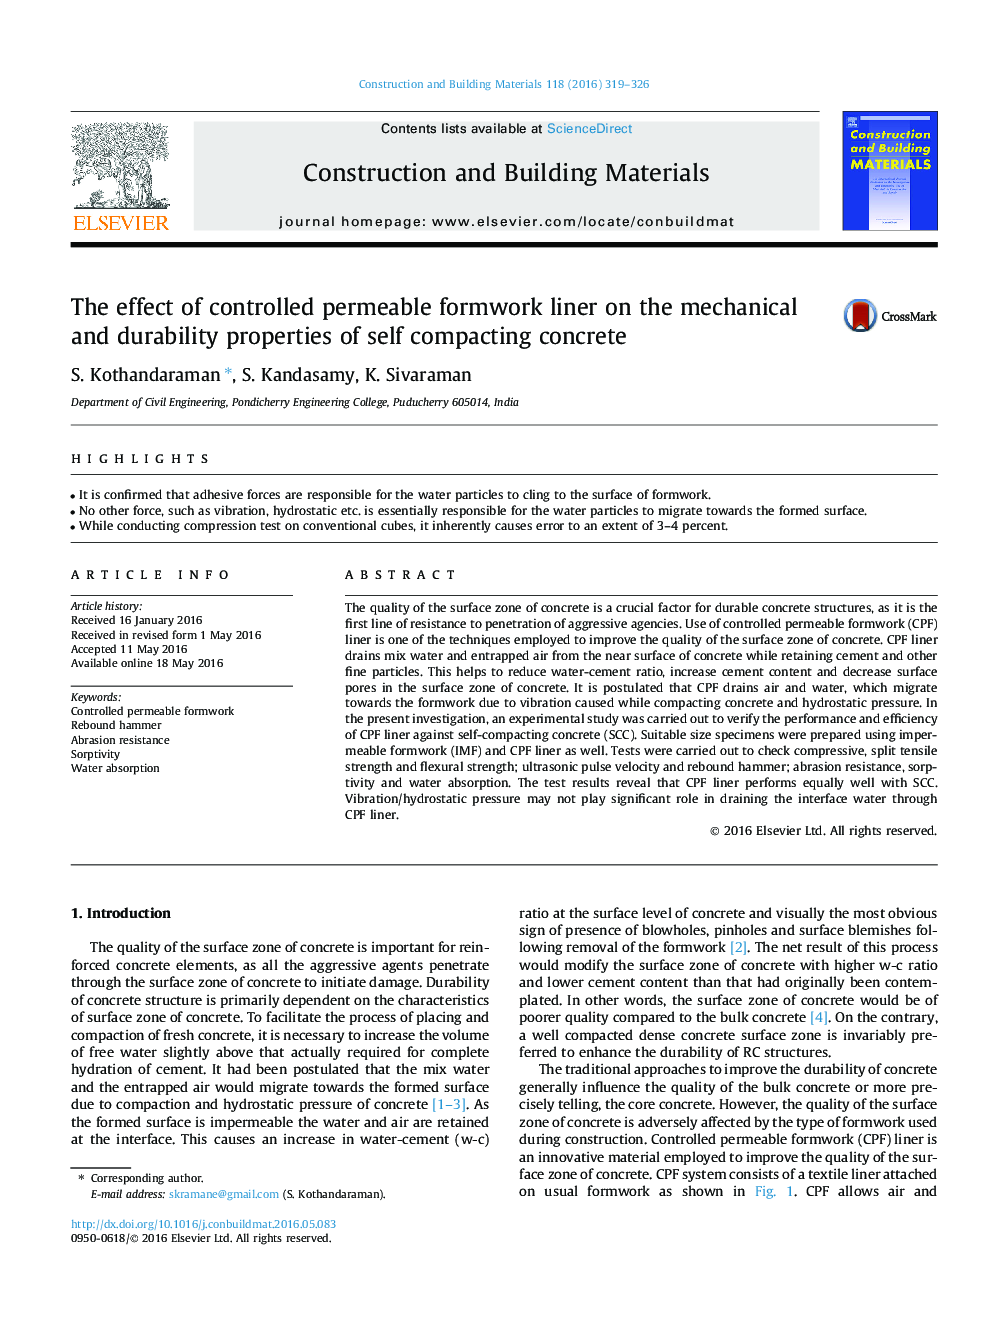 The effect of controlled permeable formwork liner on the mechanical and durability properties of self compacting concrete